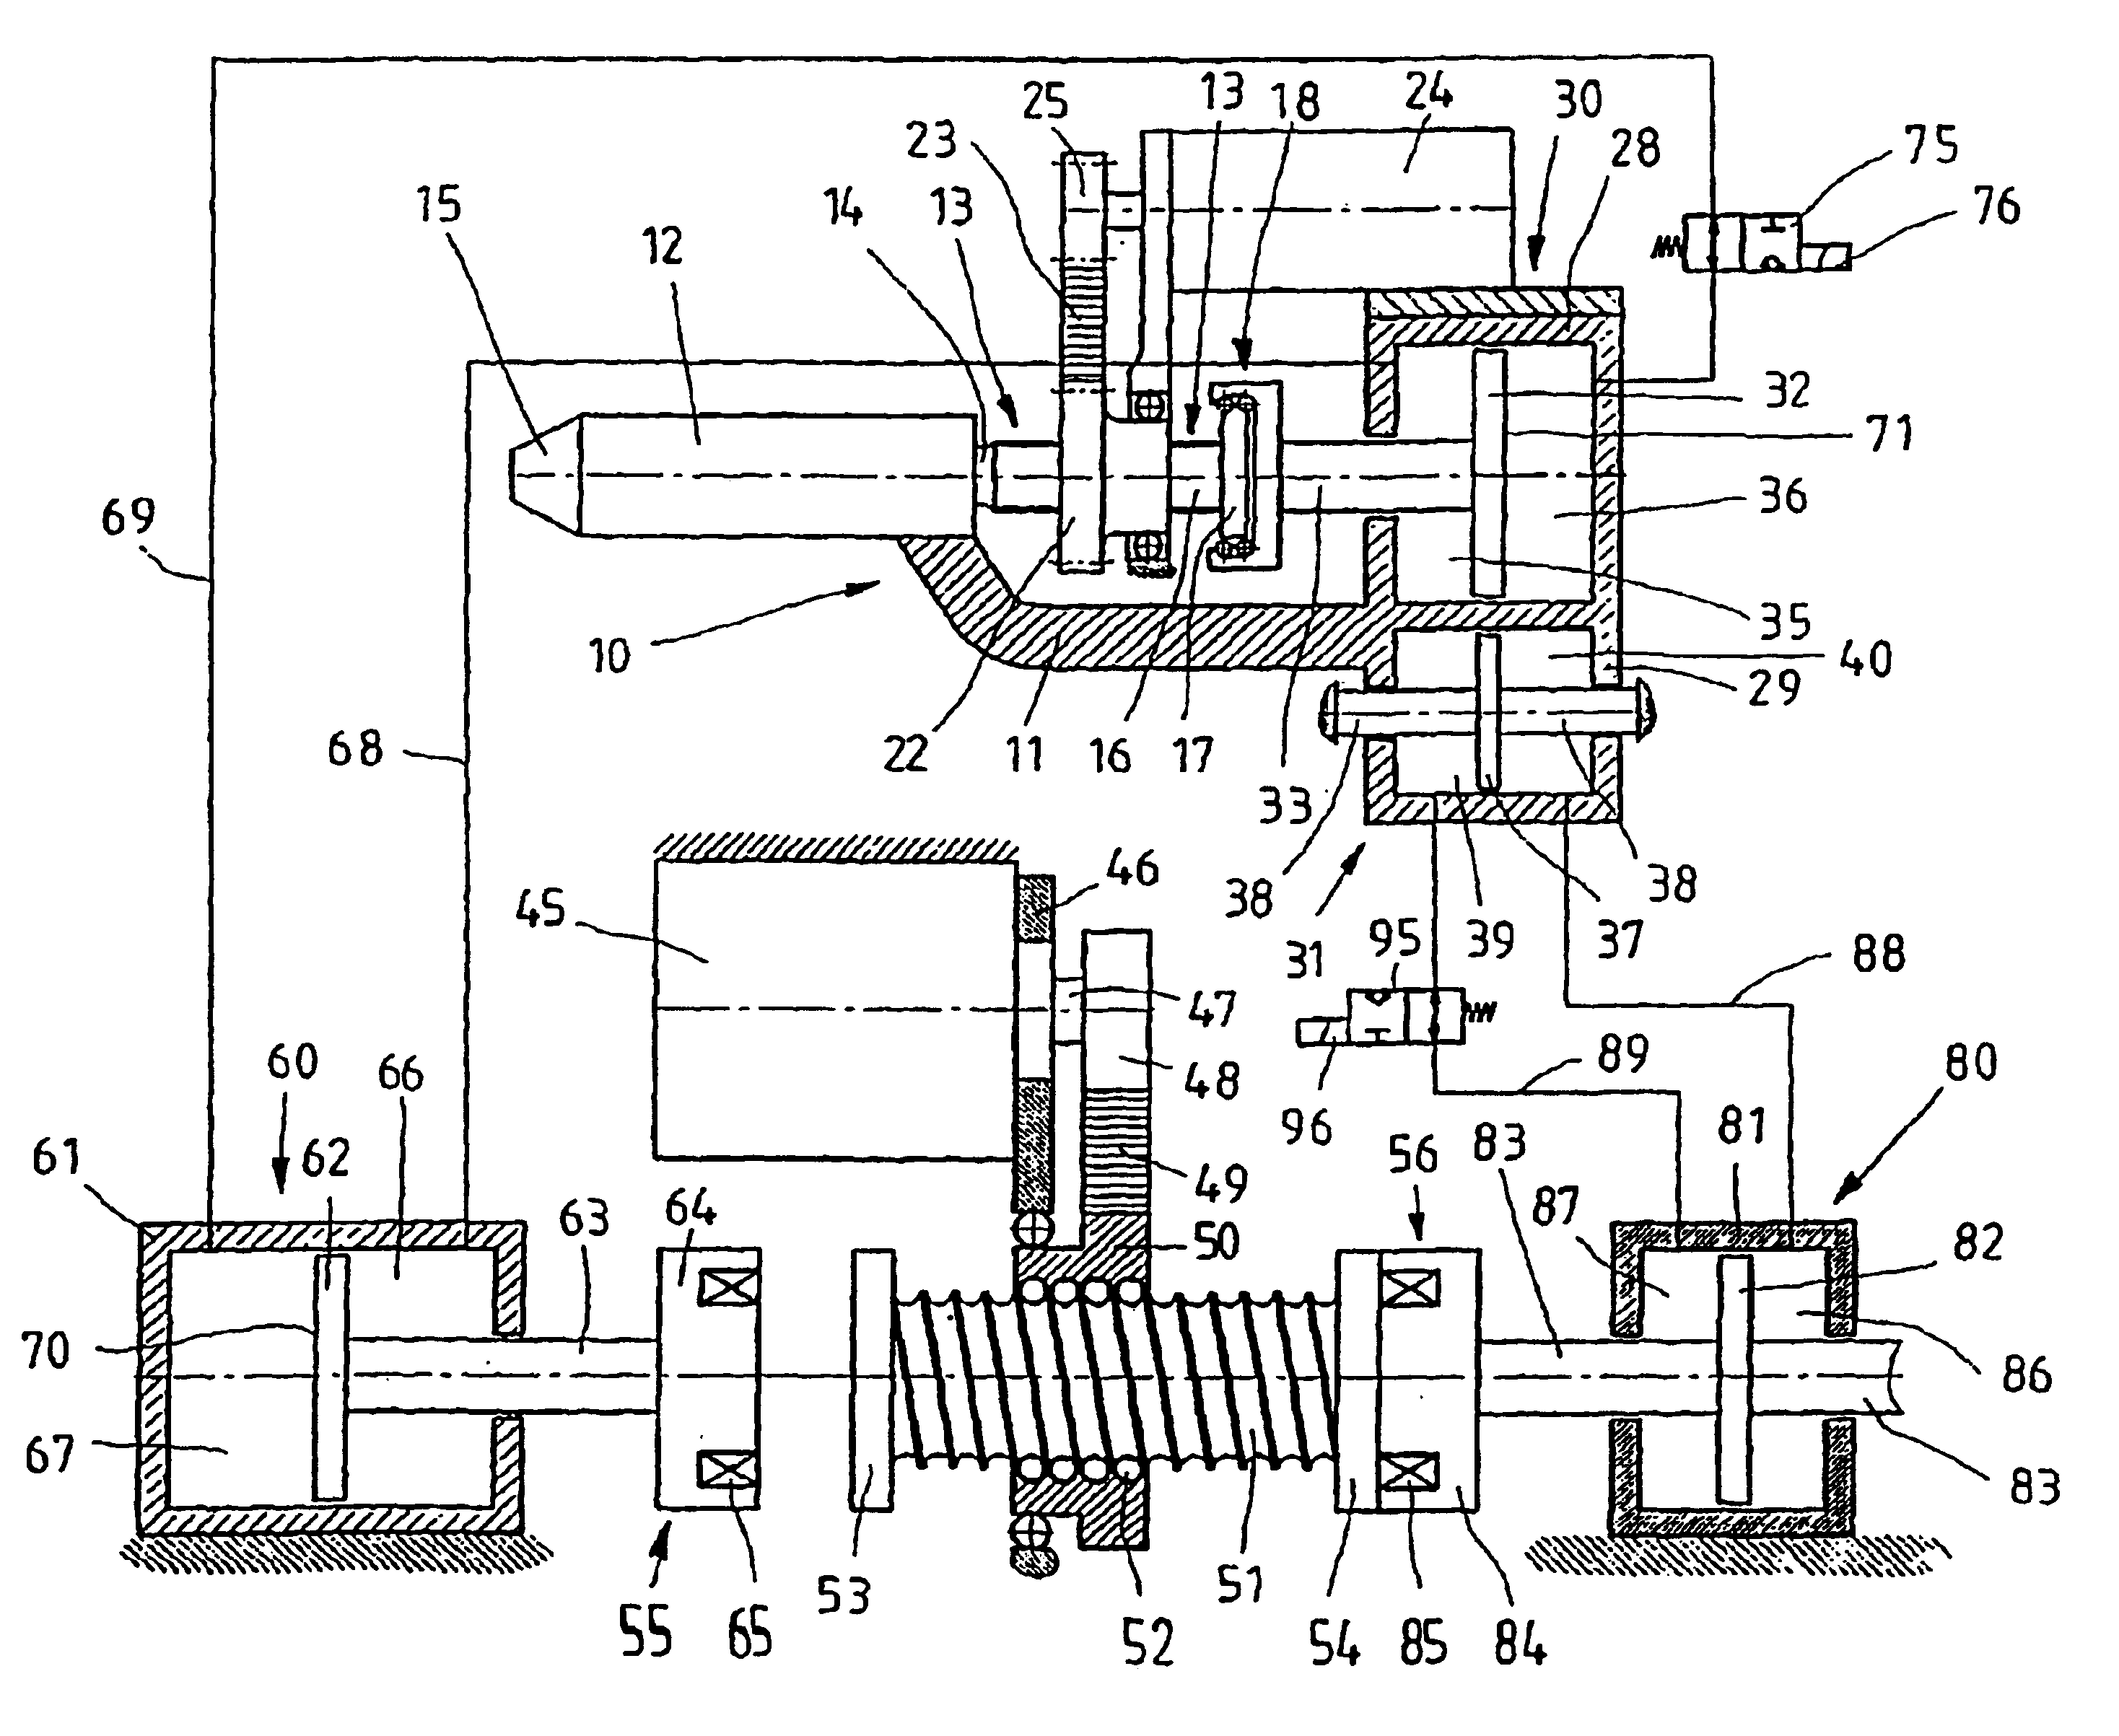 Drive device for displacing two linearly moveable components pertaining to a plastic injection moulding machine